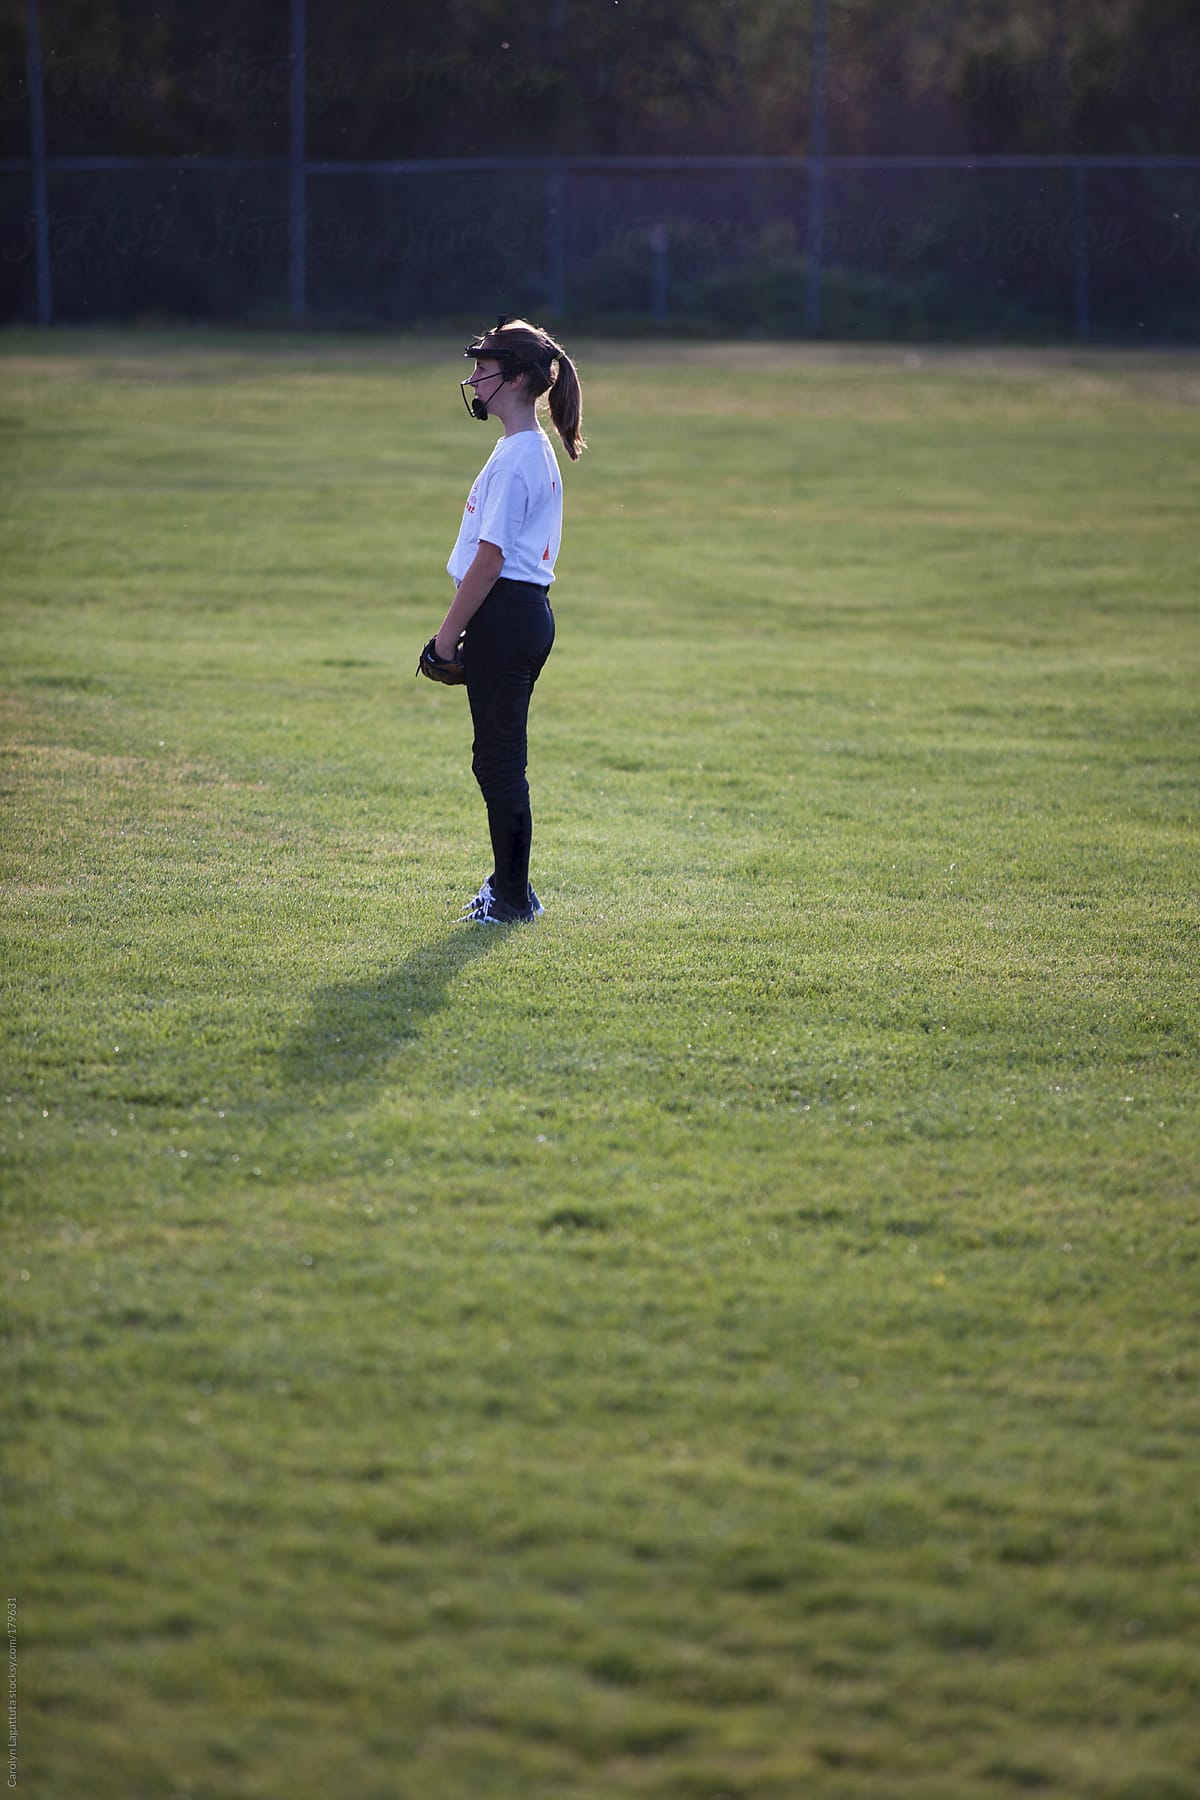 Young girl standing in the outfield at a softball game